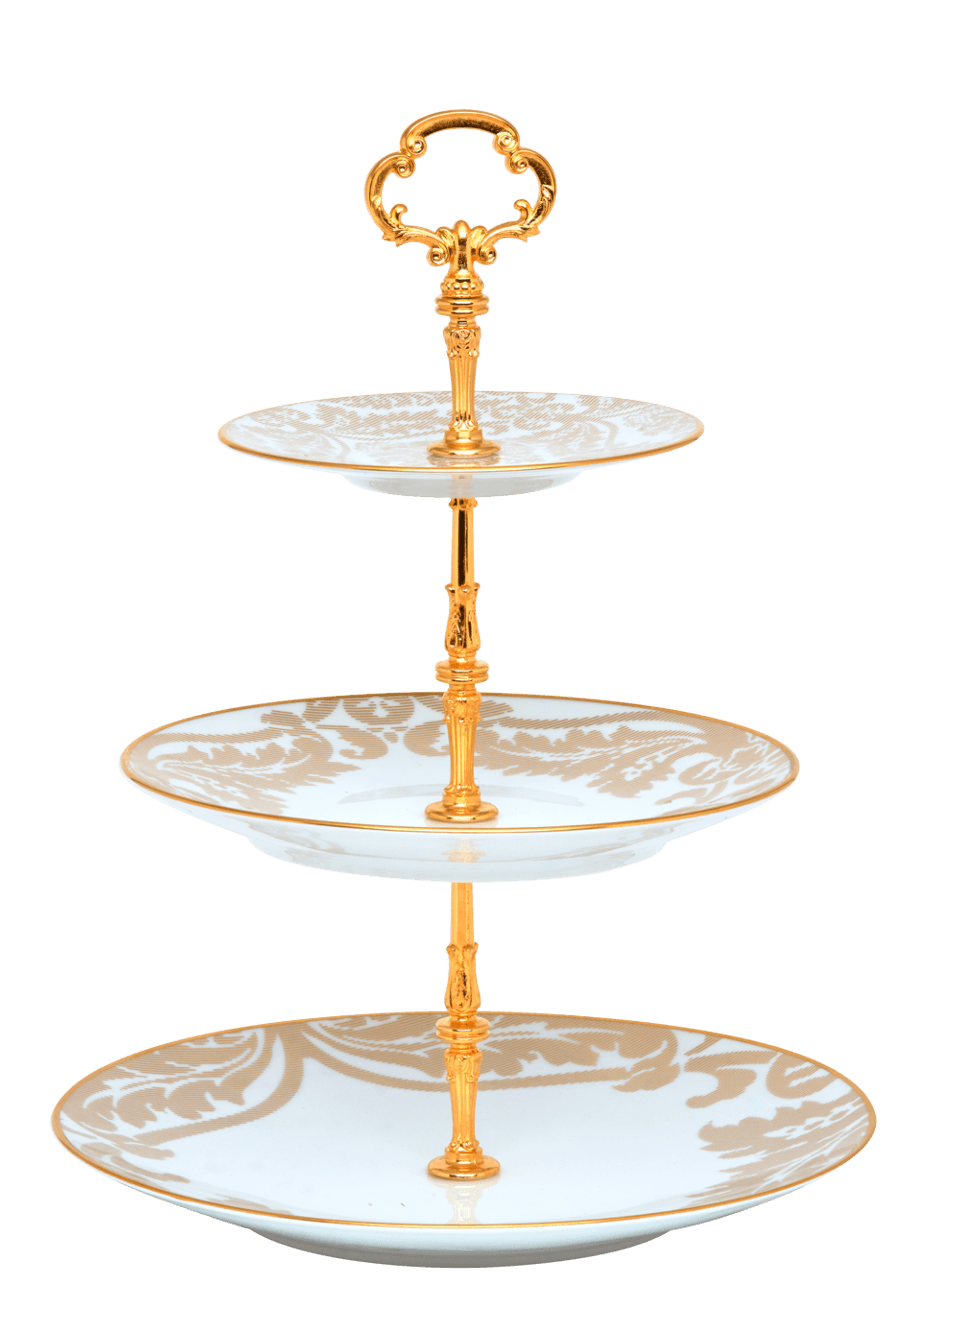 3 Tier Cake Plate Gold